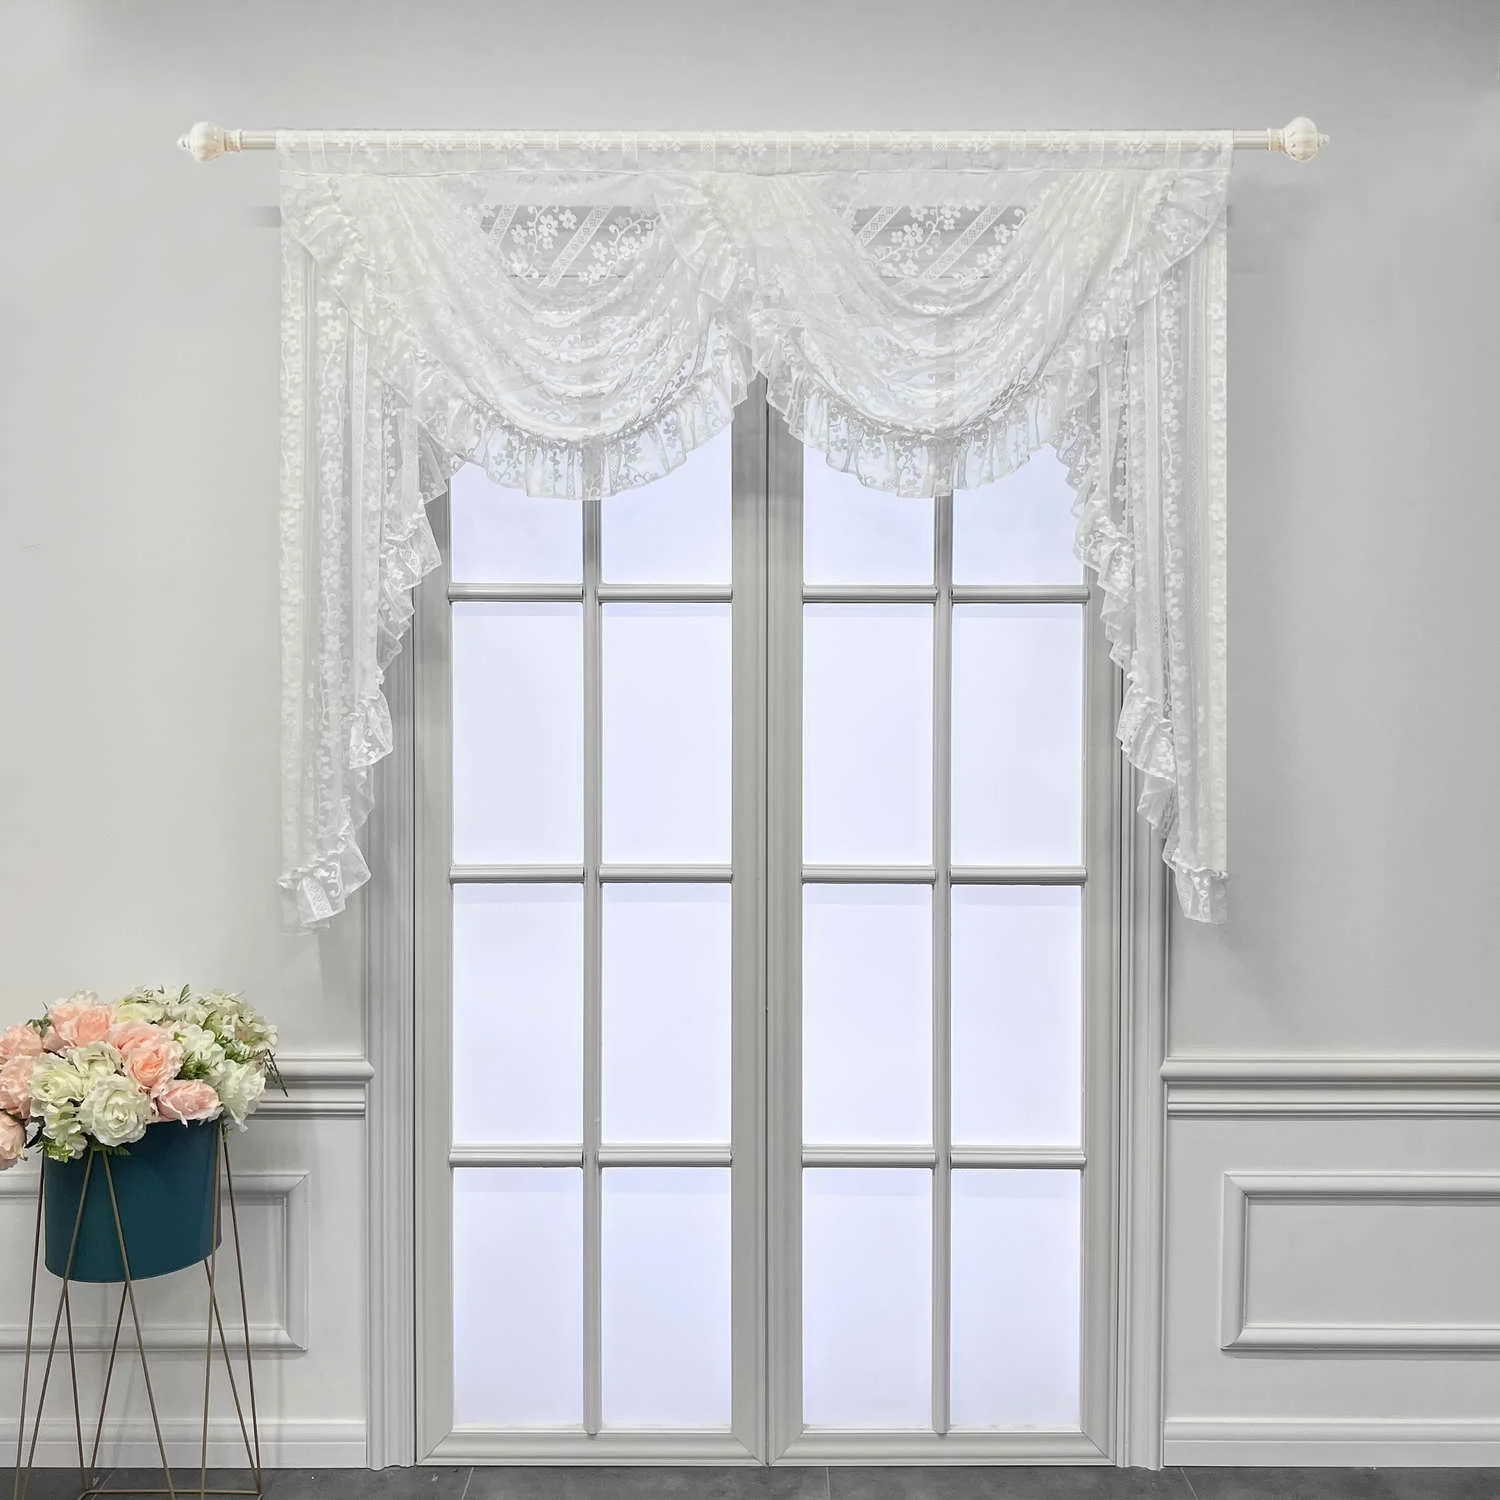 

White Floral Drape Curtain for Living Room Bedroom Pastoral Swags Waterfall Valance with Beaded Lace Fringe Trim Sheer Panel #E